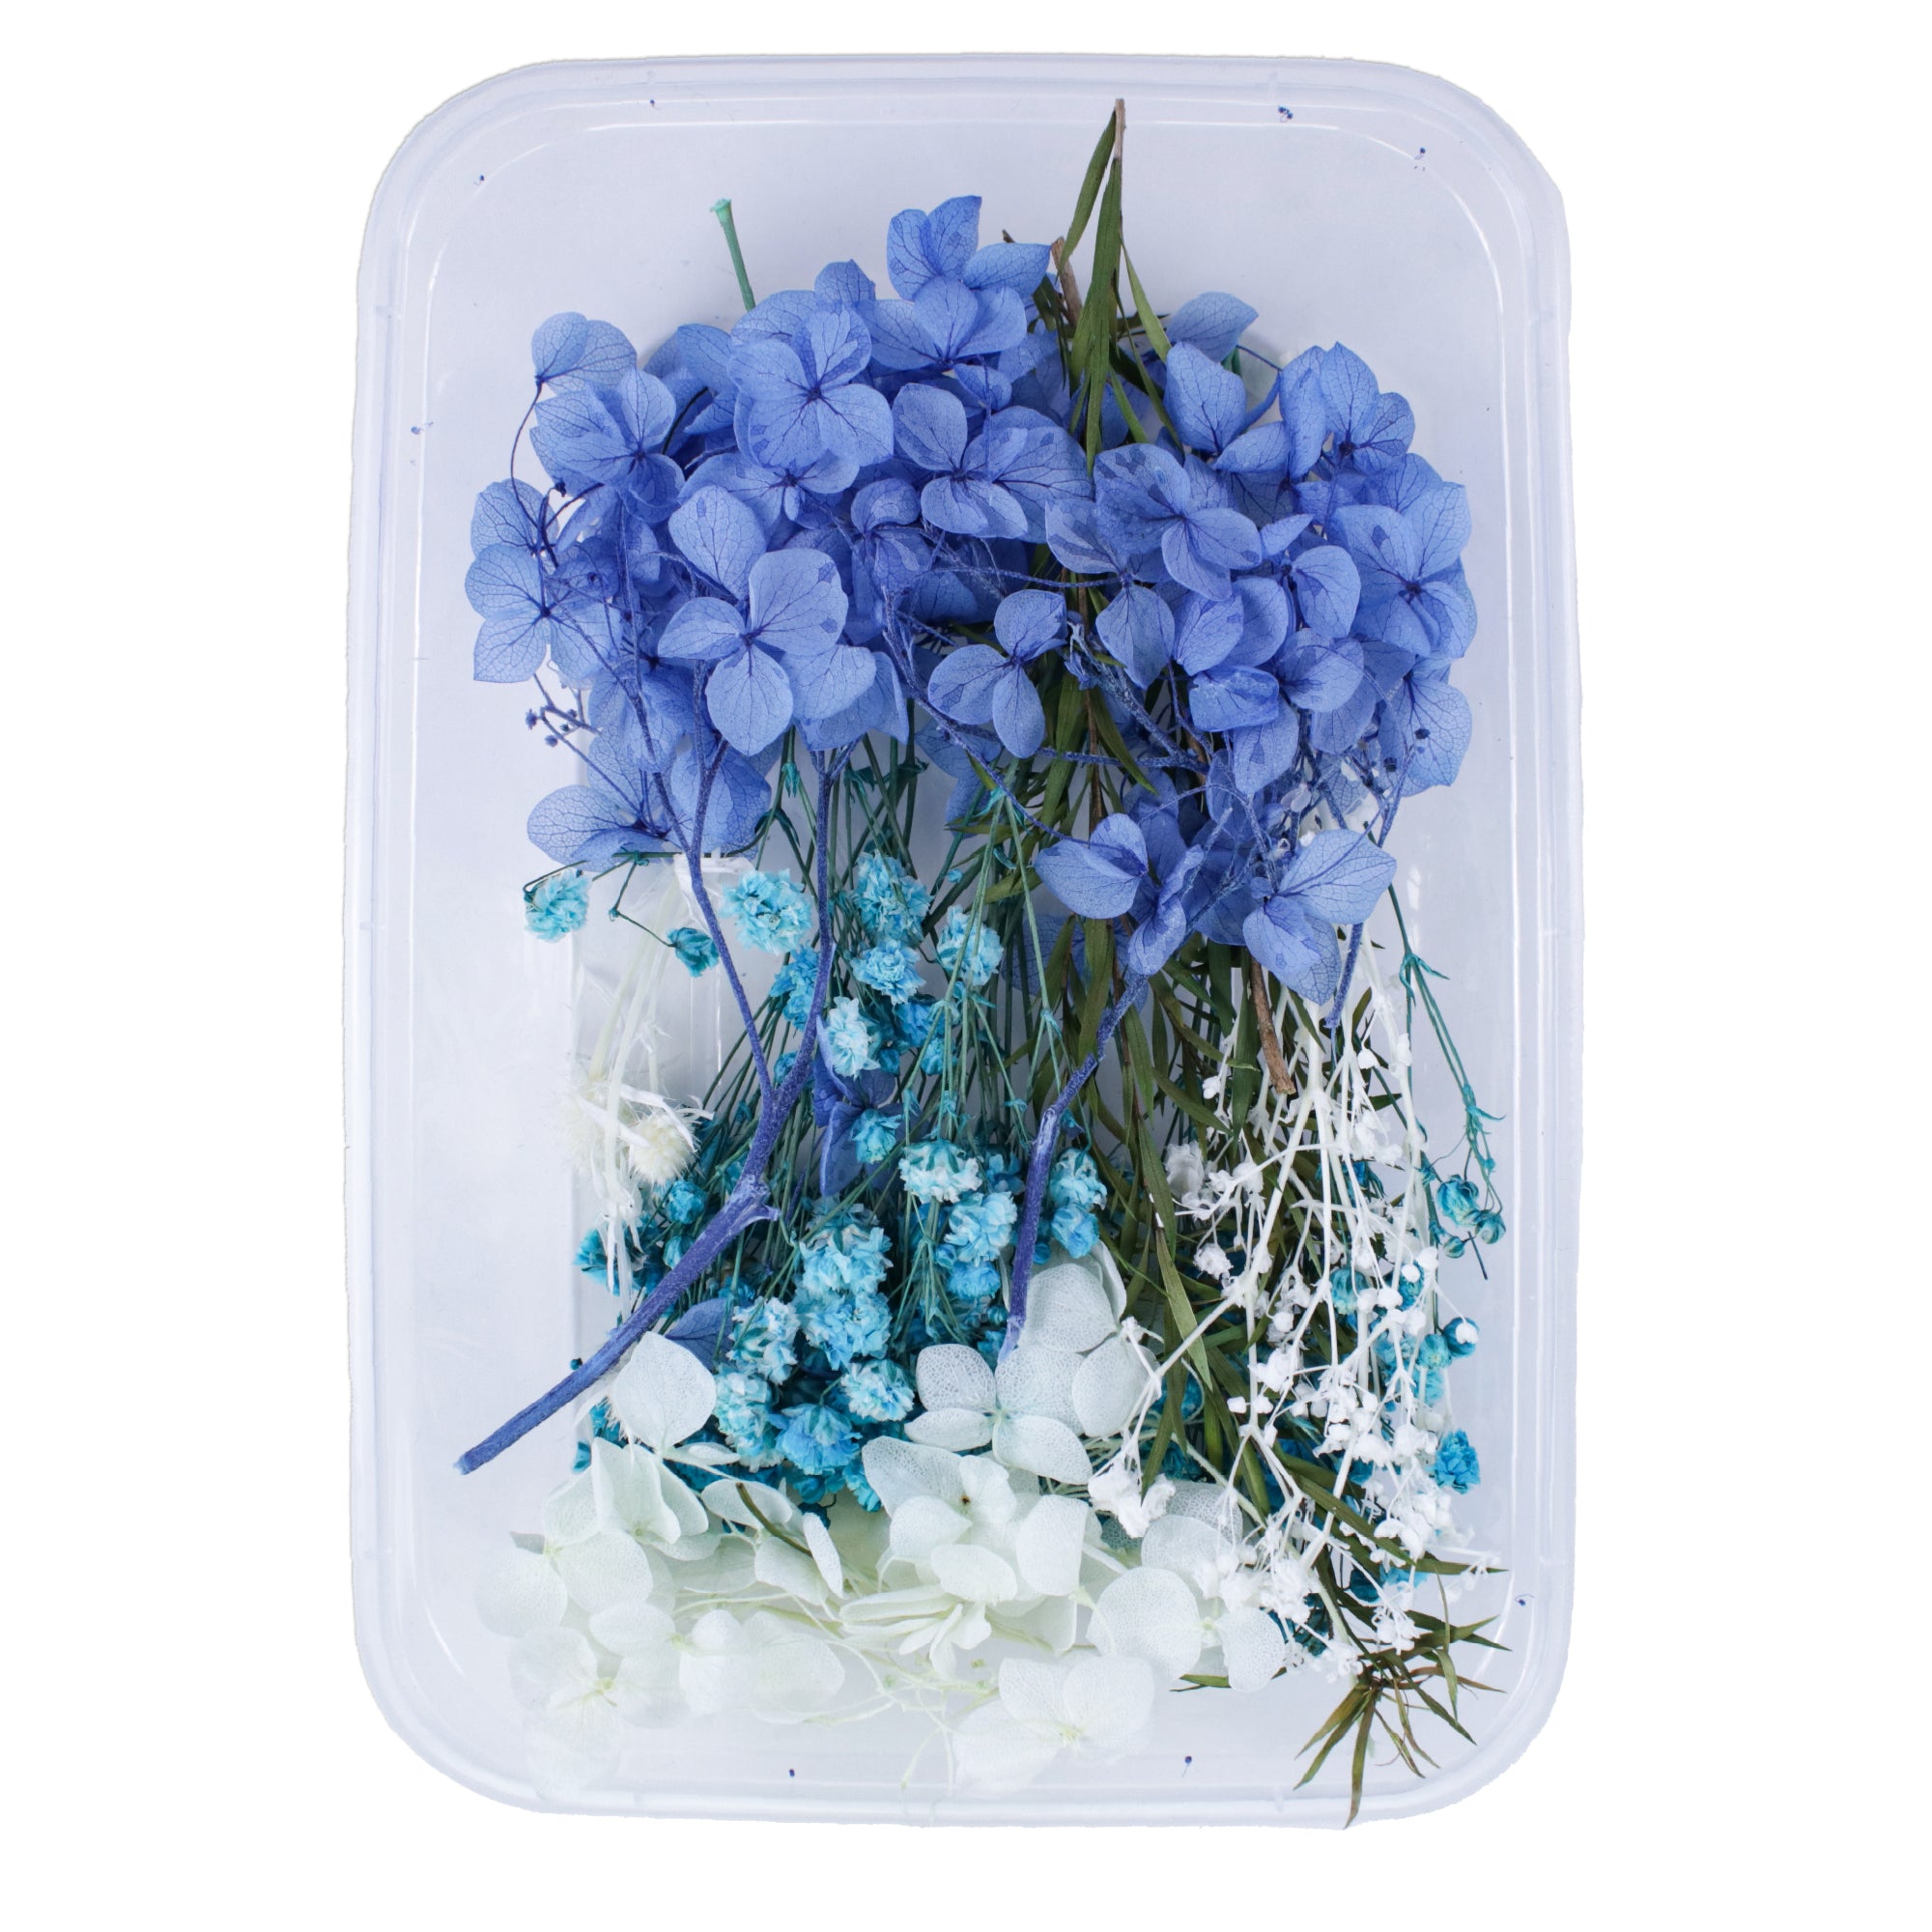 Resin Art Natural Dried Flowers Auqa Ice Blossoms 1 Box Ib